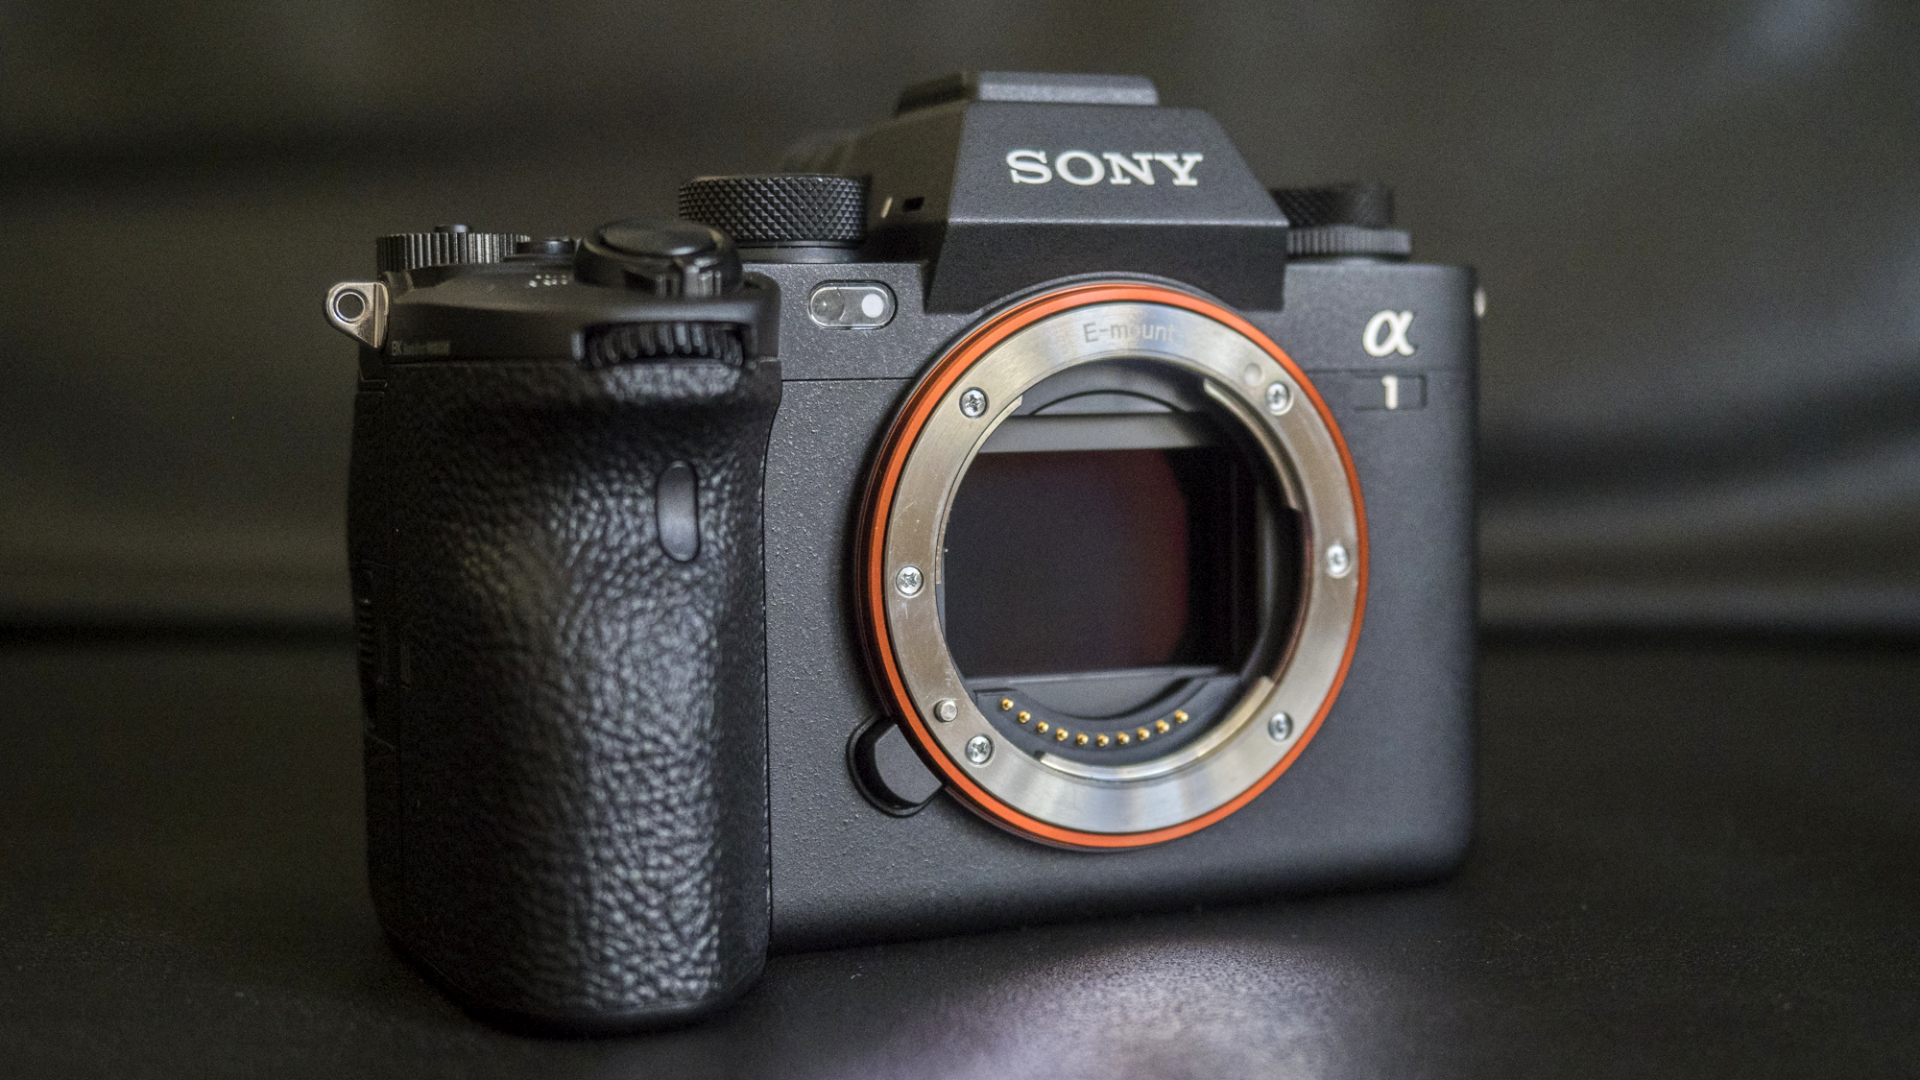 Sony Alpha 1 - Photo Review